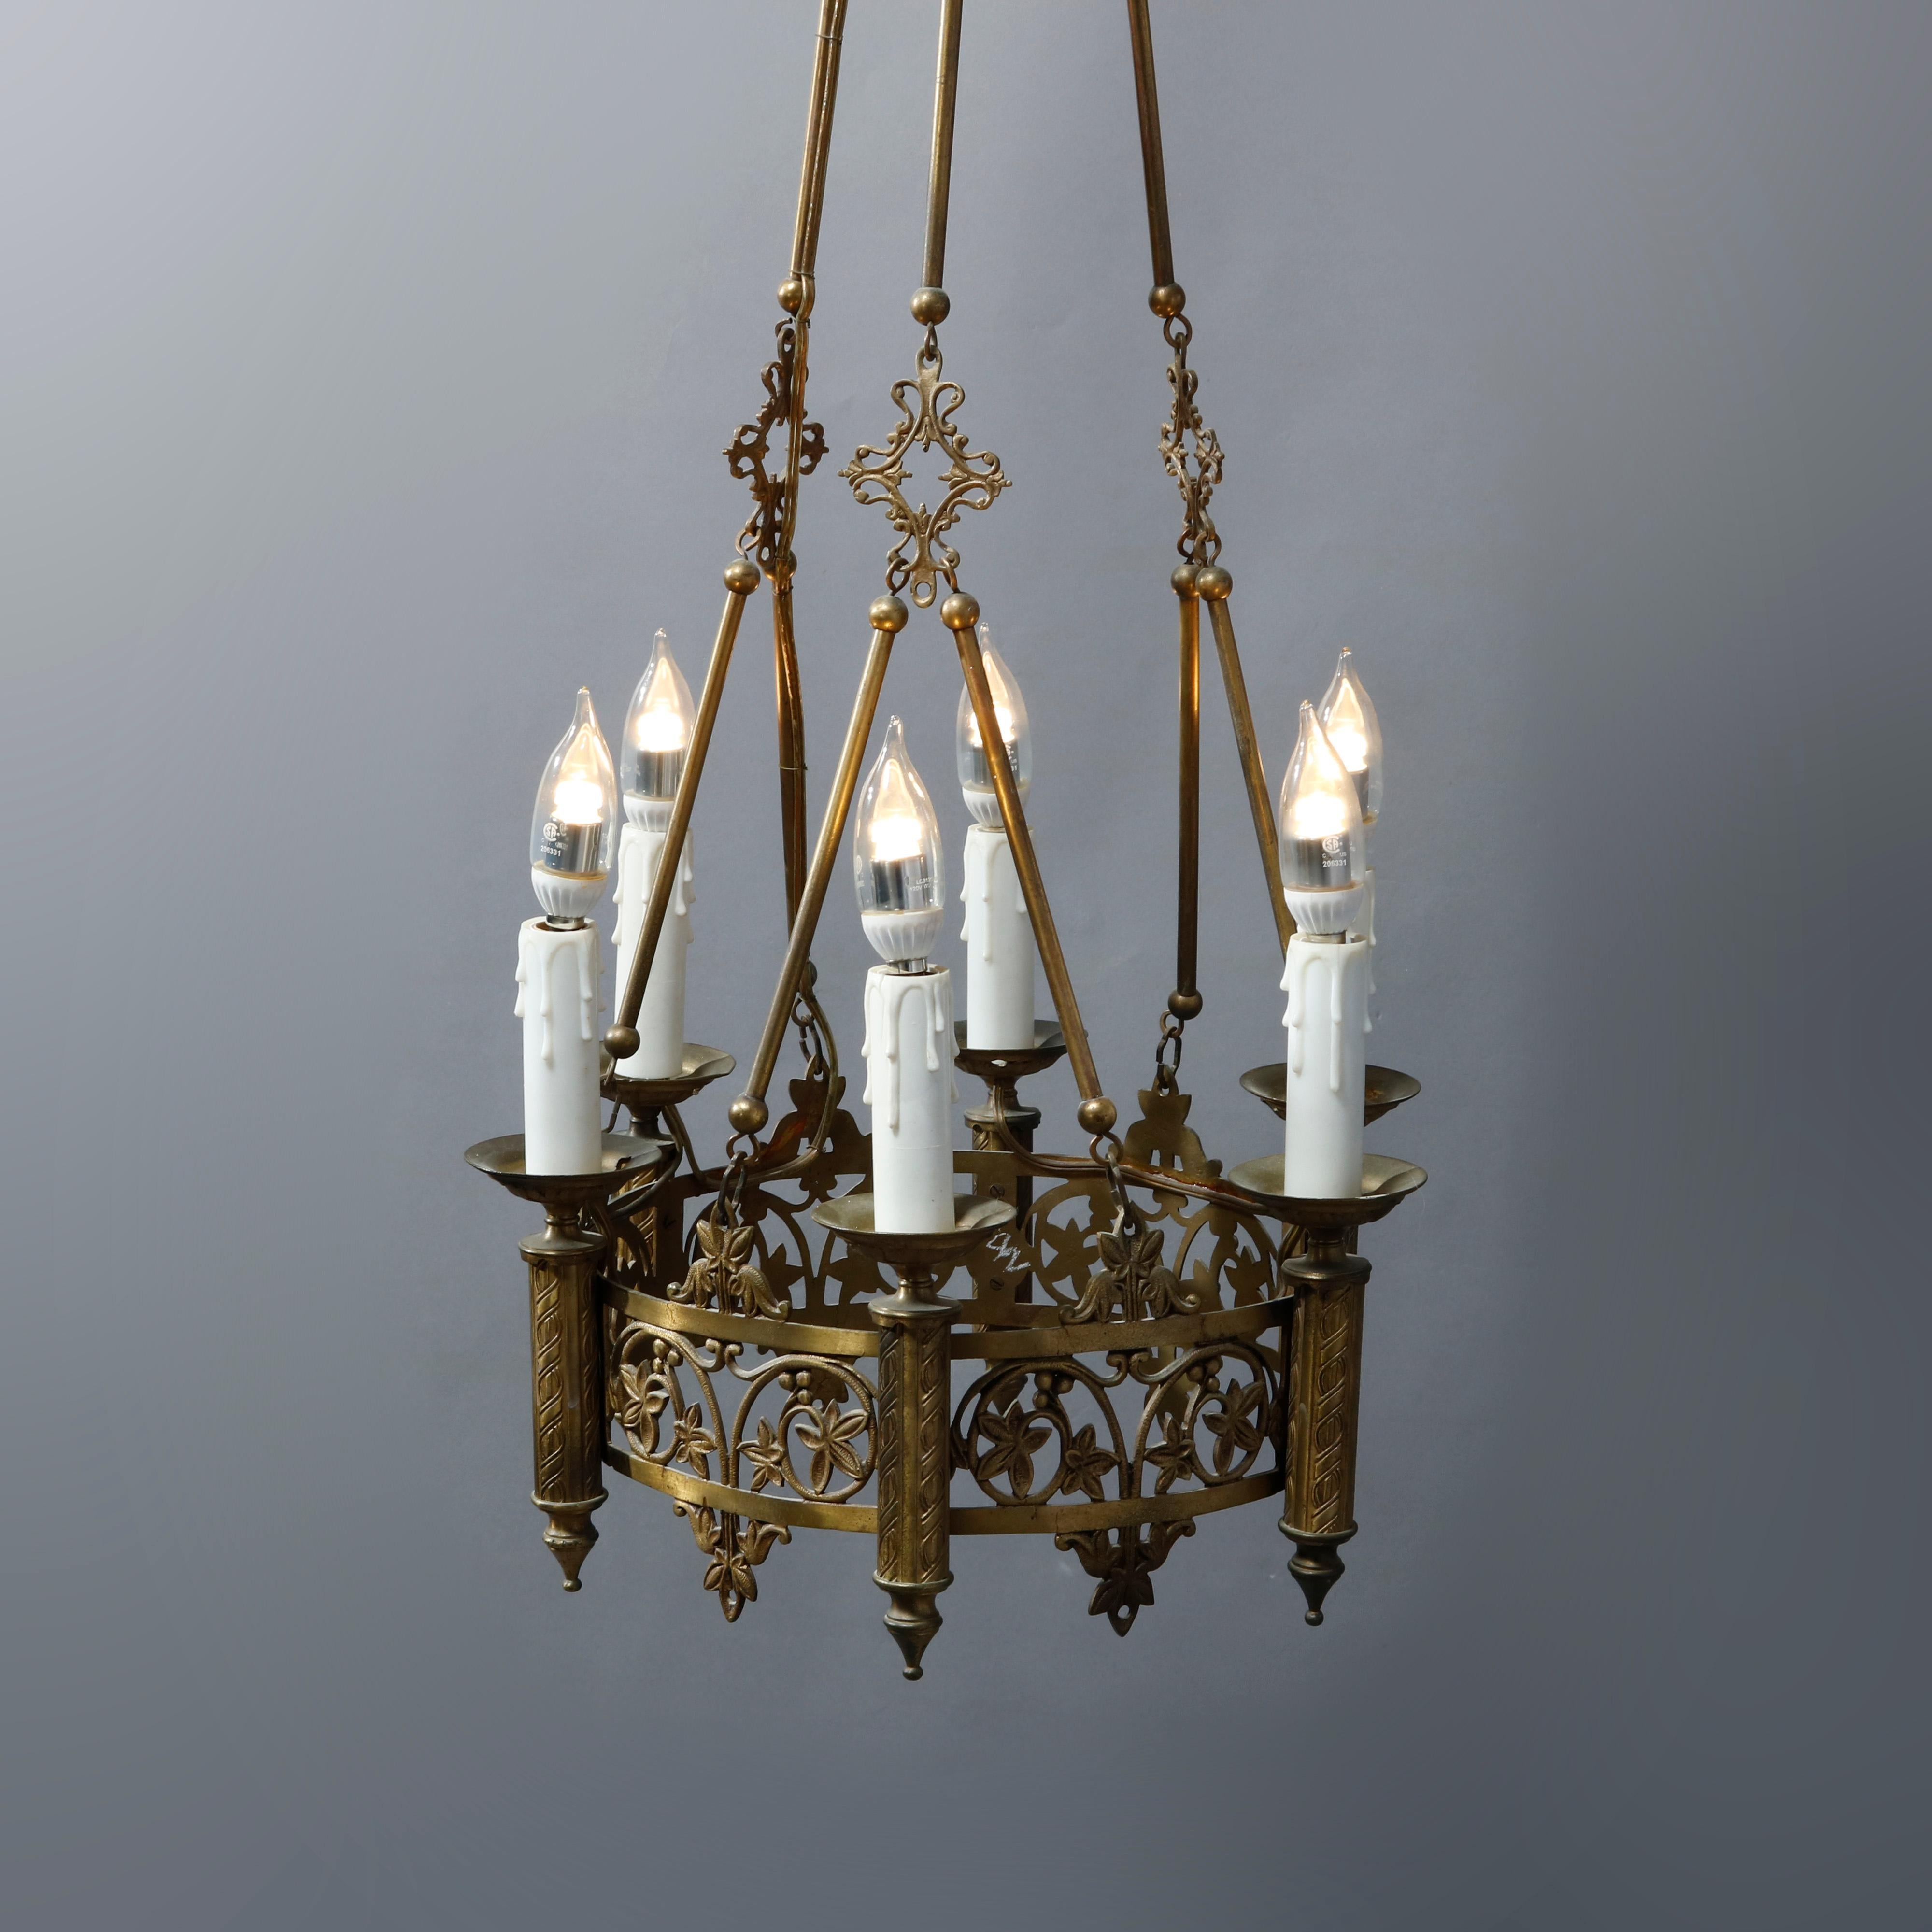 An antique Gothic hanging chandelier offers cast bronze pierced scroll and foliate filigree frame with six candle lights and drop bar chain with crown form cap, c1900.

Measures: 44.5